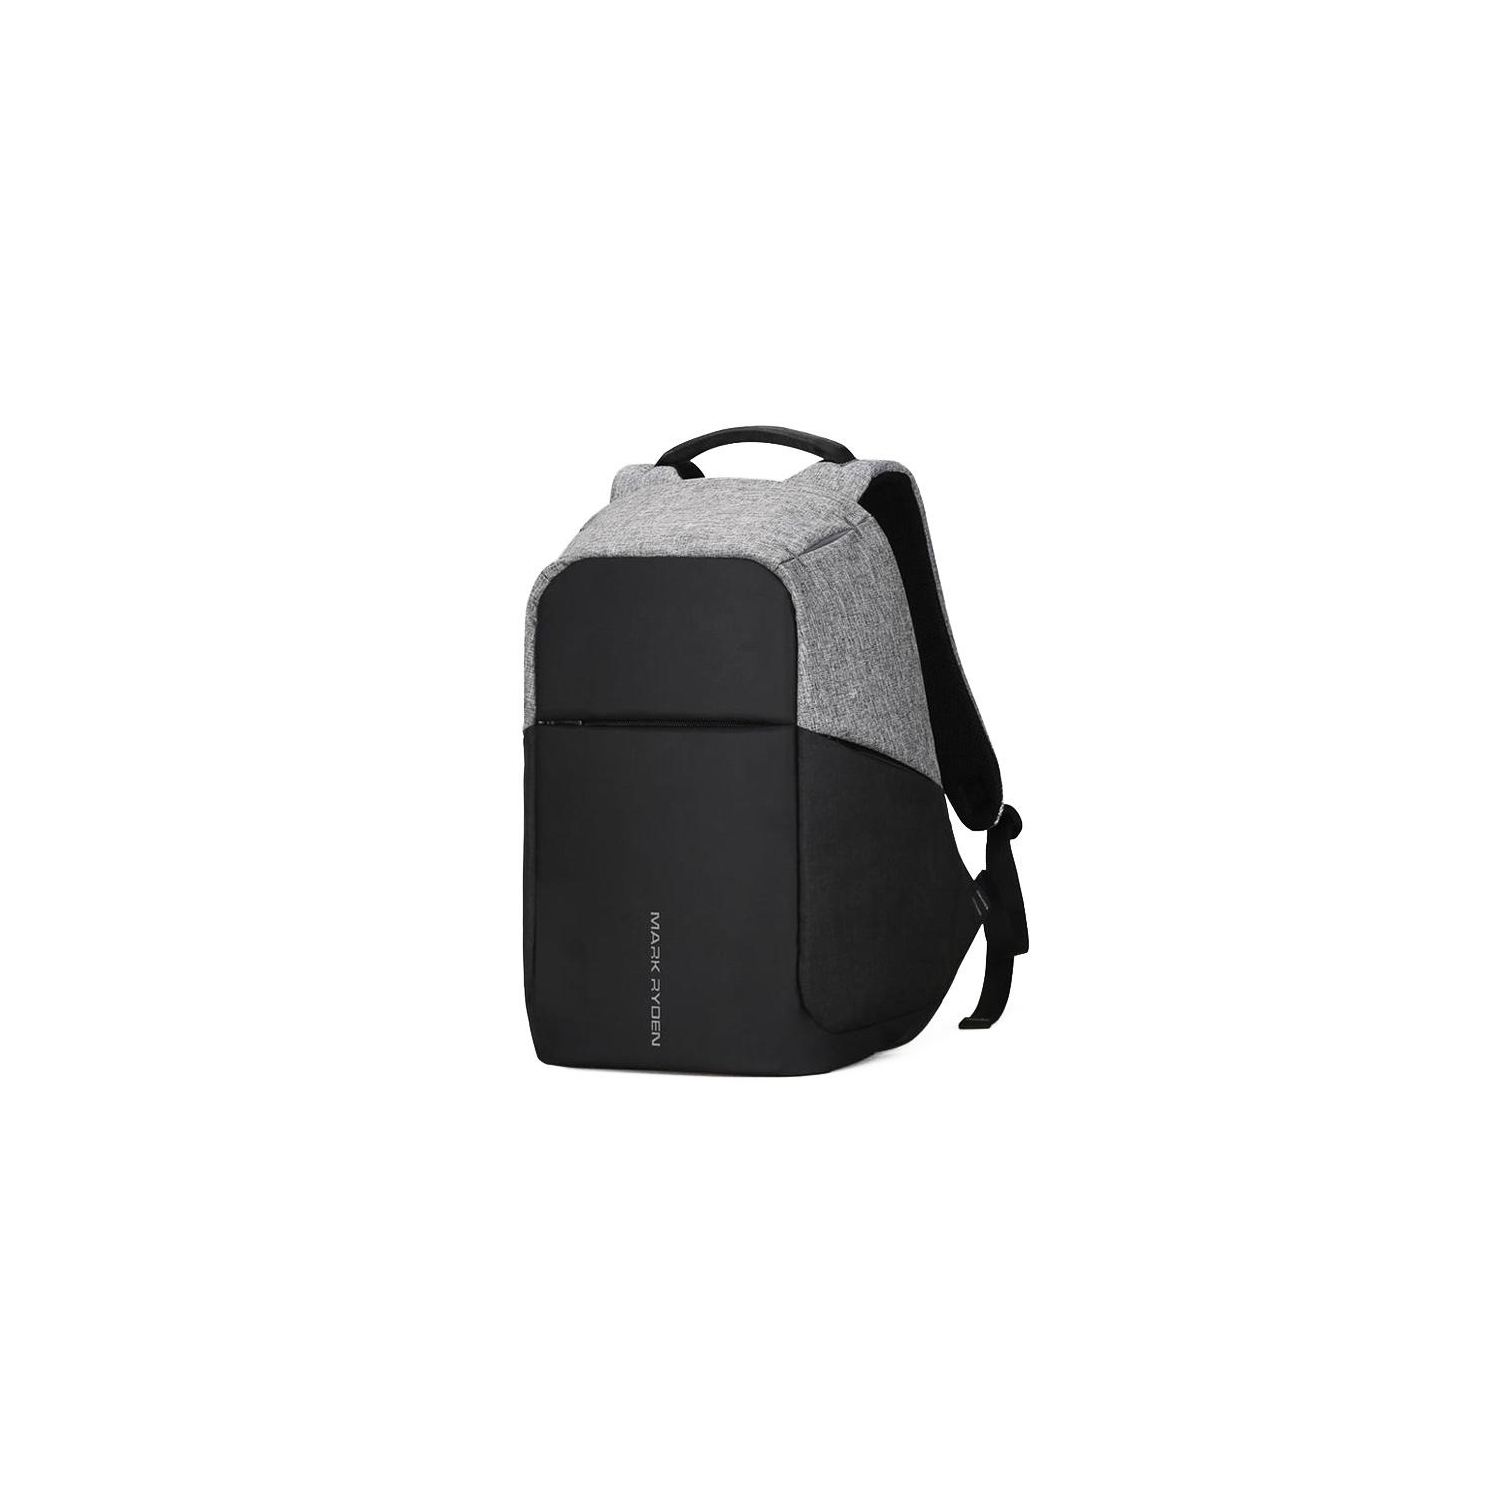 Mark Ryden "FRESH" (BLACK) Anti-theft Laptop Backpack Business Bags with USB Charging, Travel Pack Fits 15.6 Inch Laptop